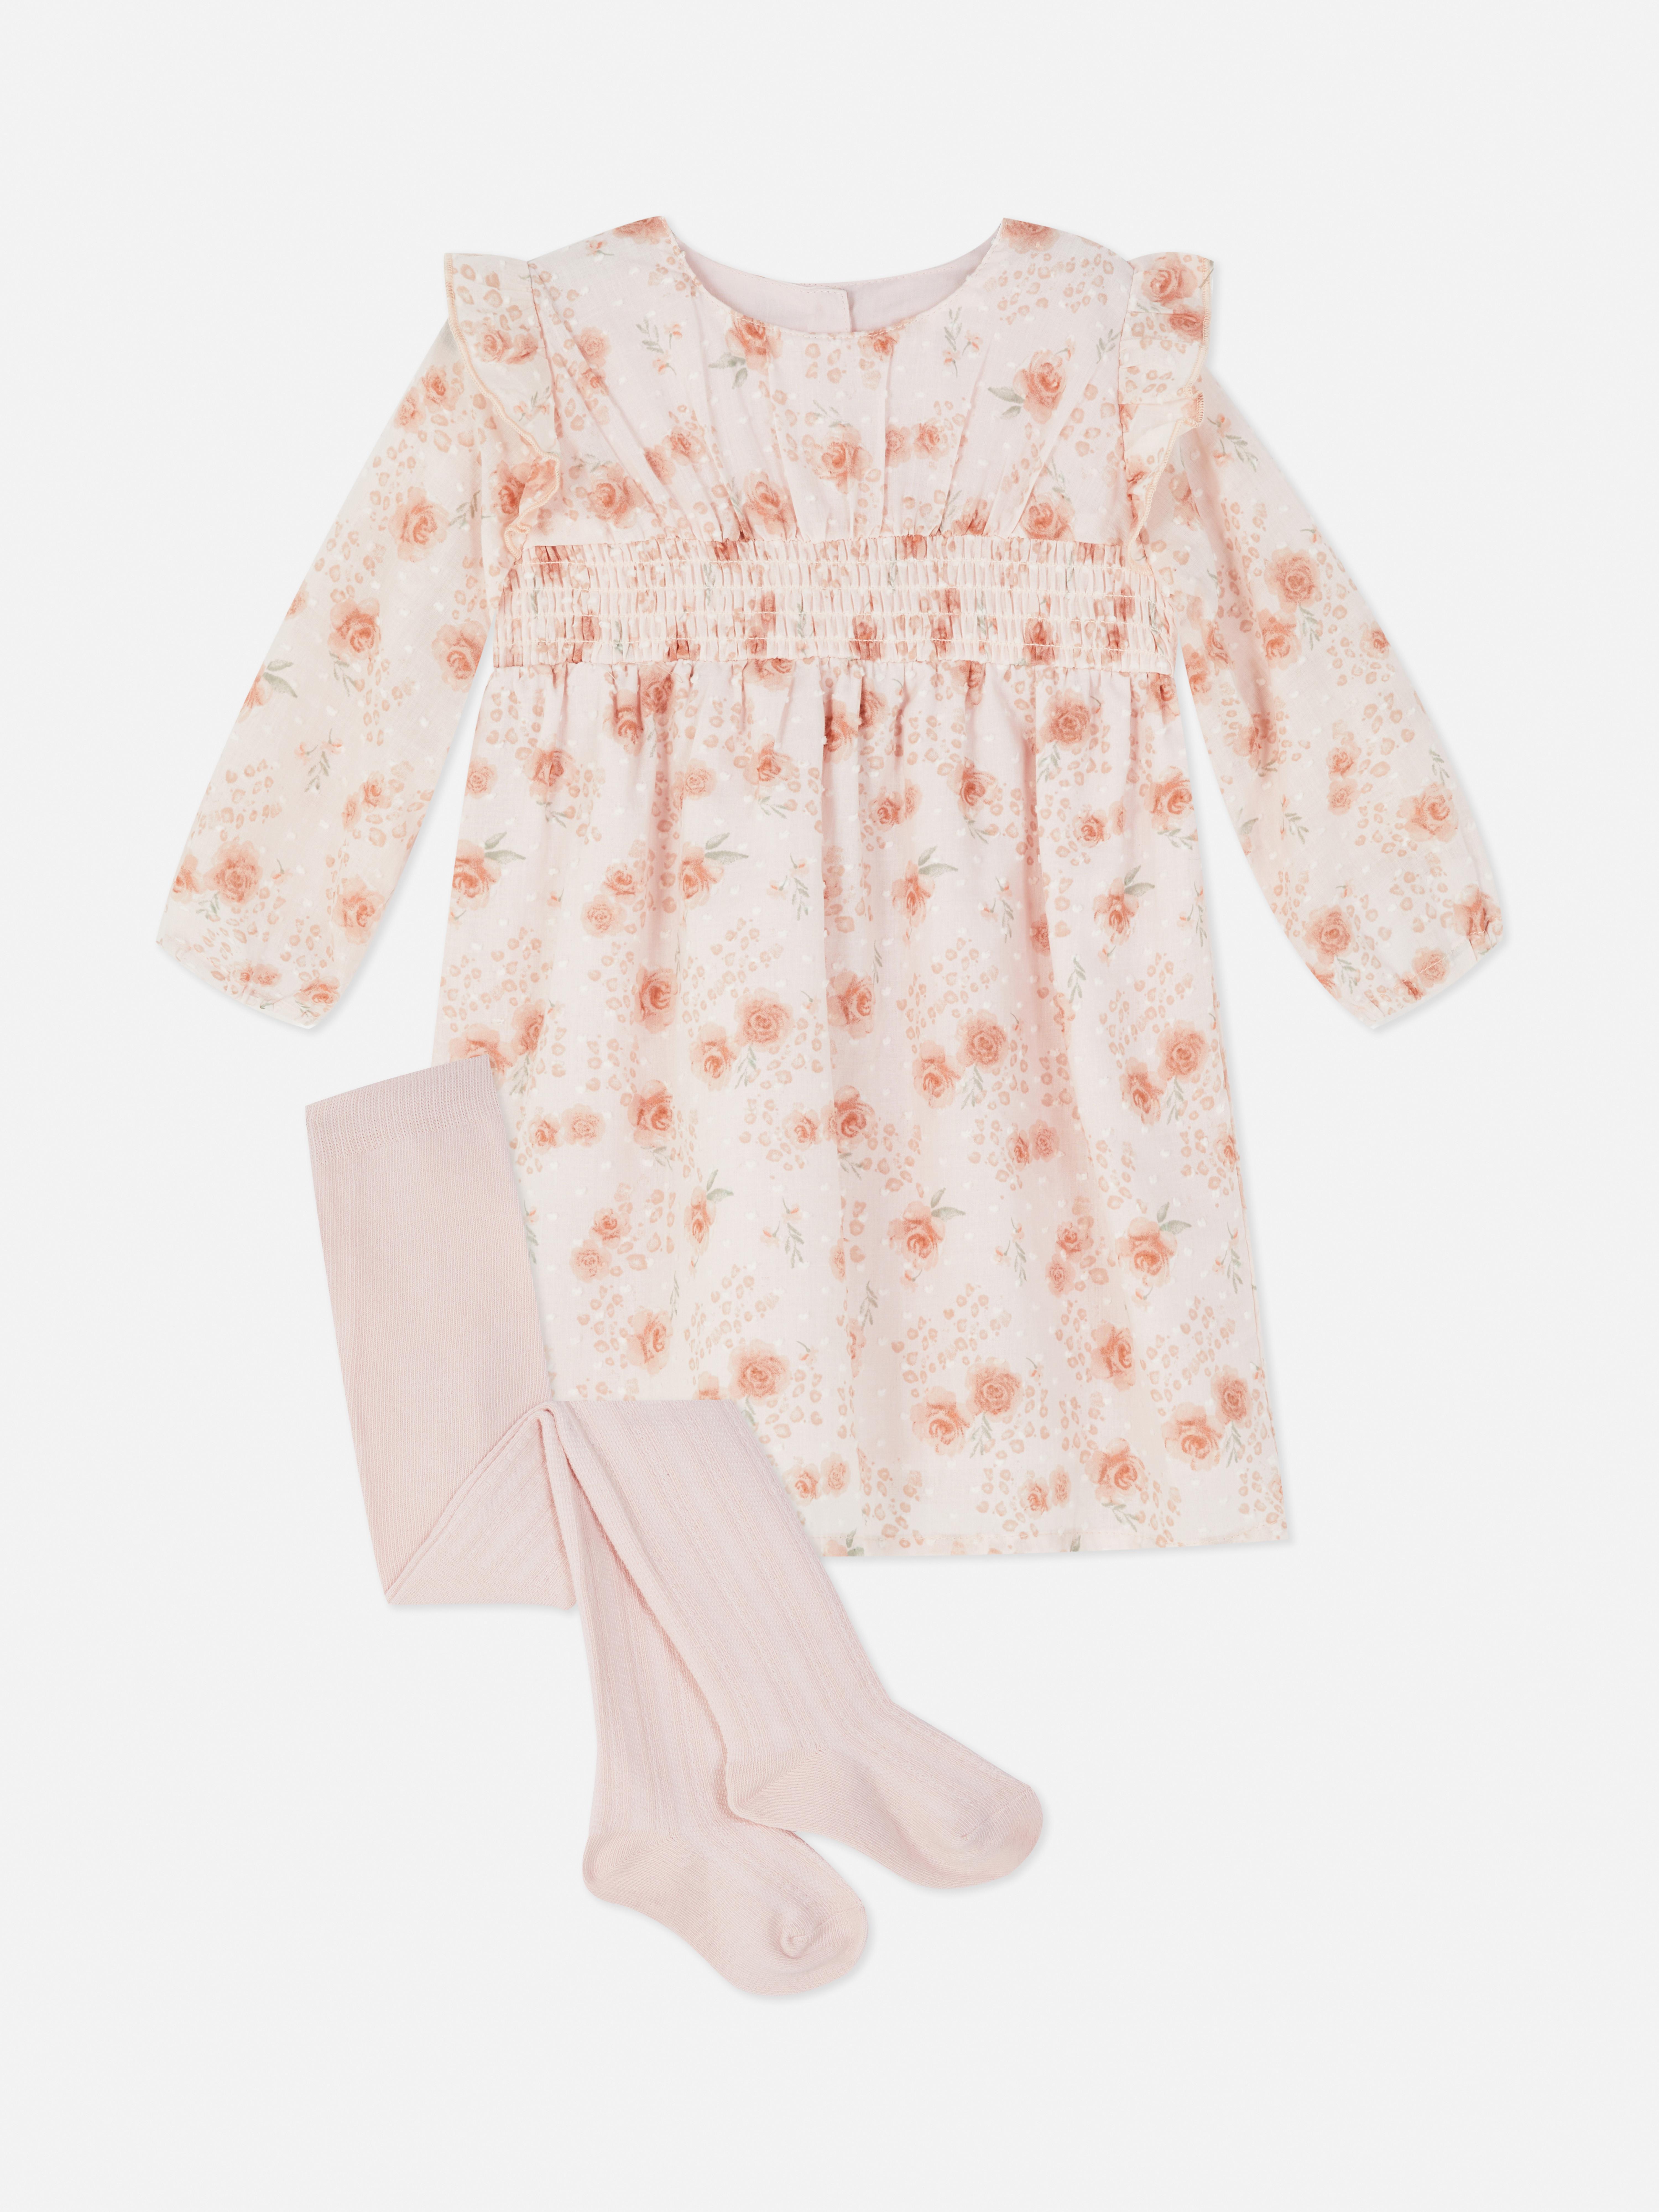 Stacey Solomon Floral Smocked Dress and Tights Set Pink